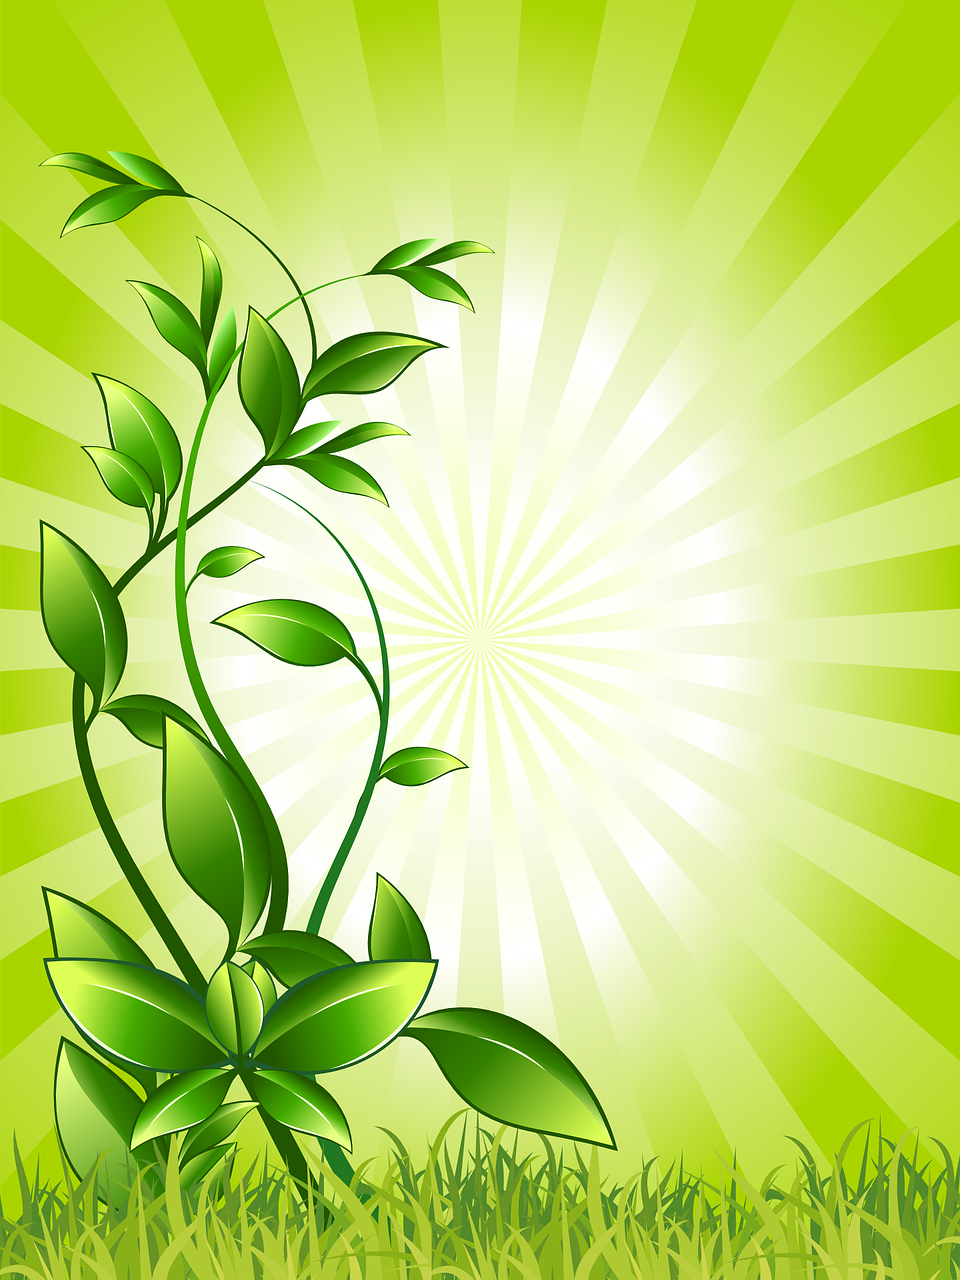 a plant with green leaves in front of a sunburst, ecological art, green tea, glossy design, breezy background, a beautiful artwork illustration